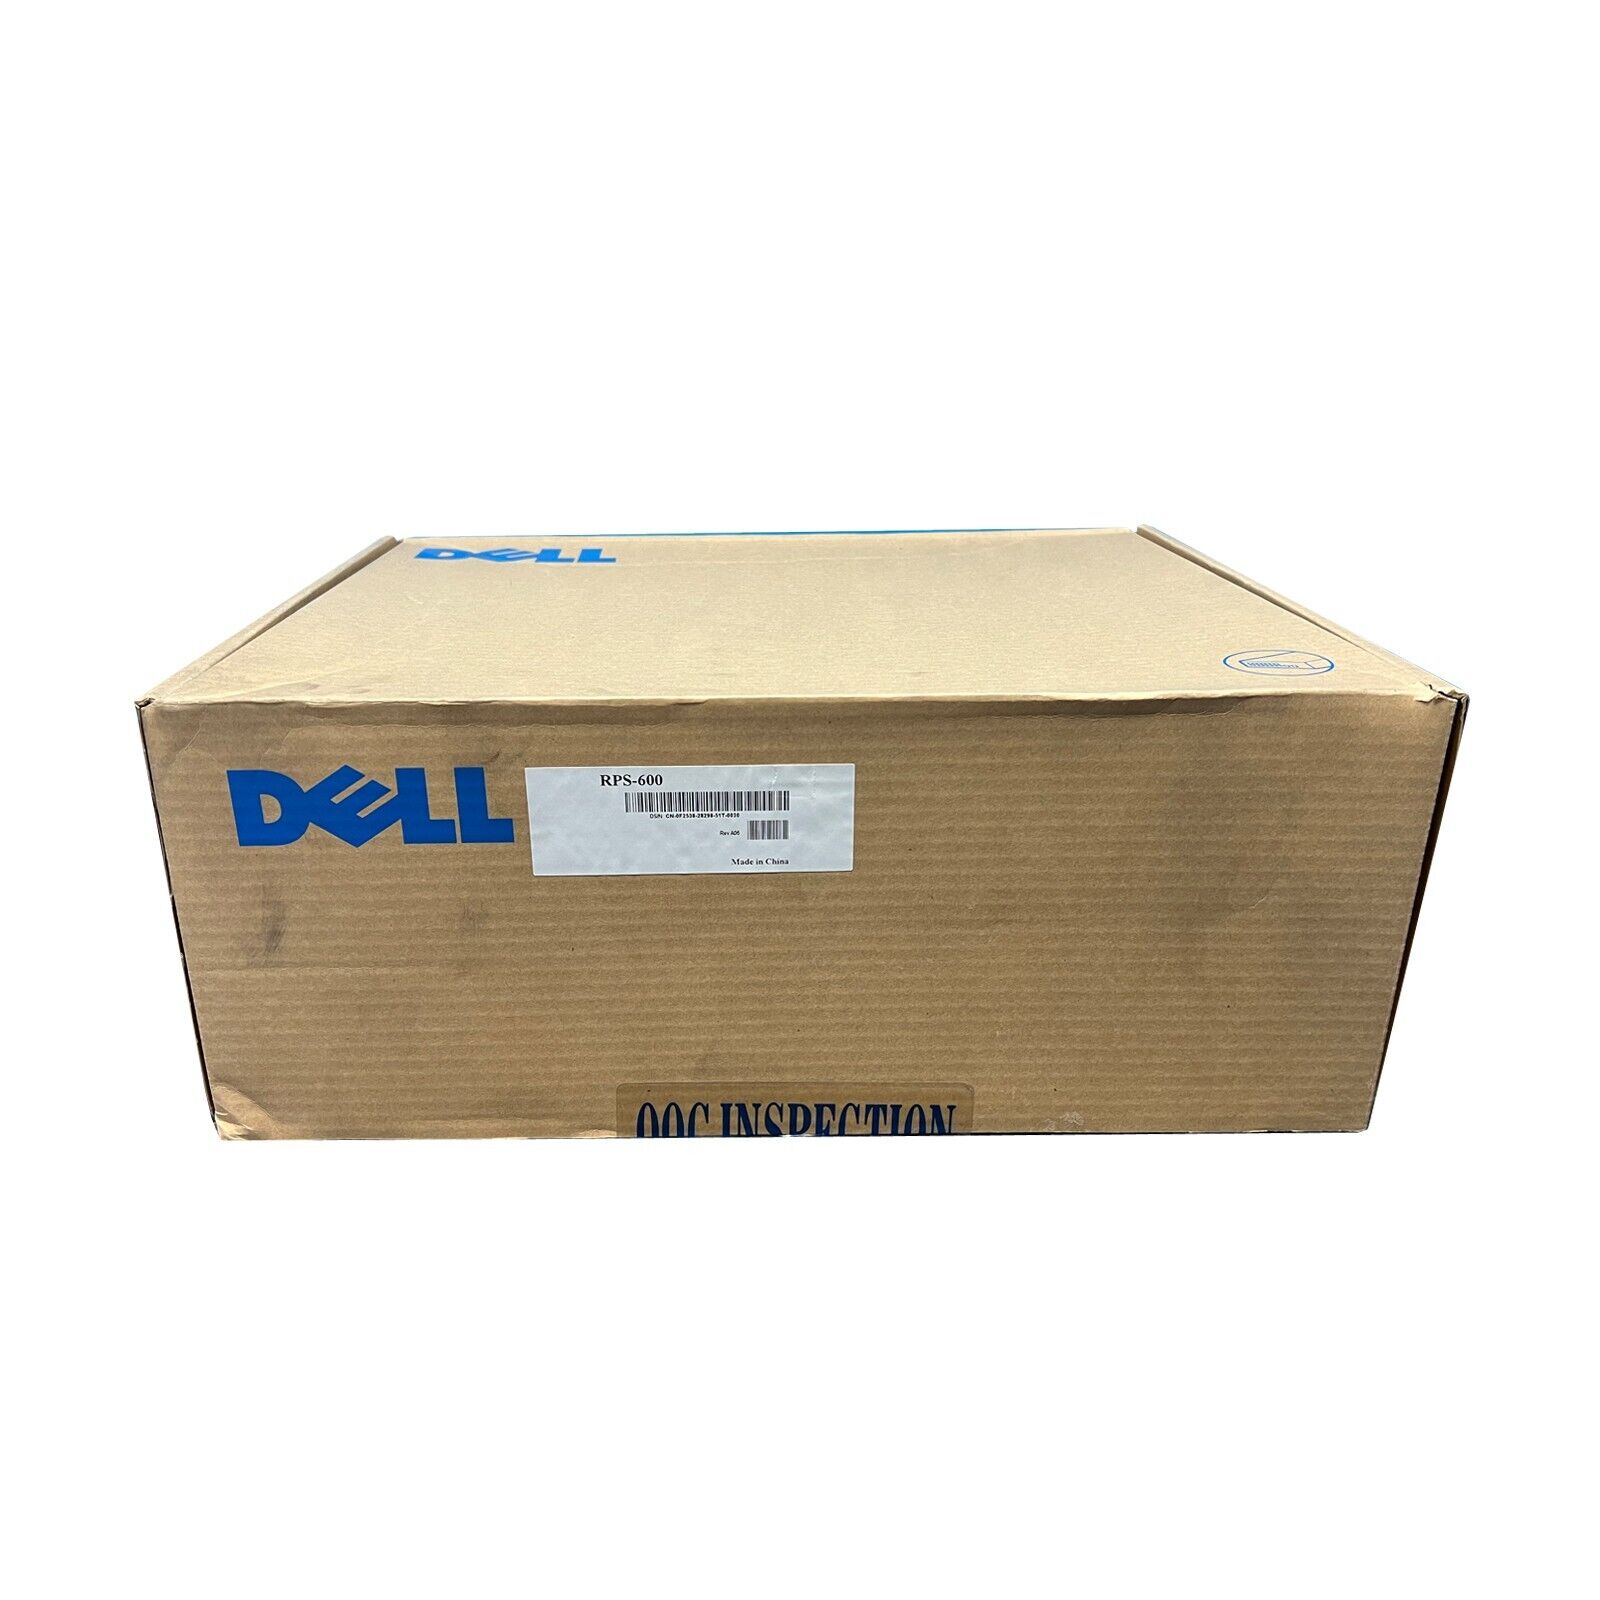 Dell F2538 PowerConnect RPS-600 Redundant Power Supply *NEW*